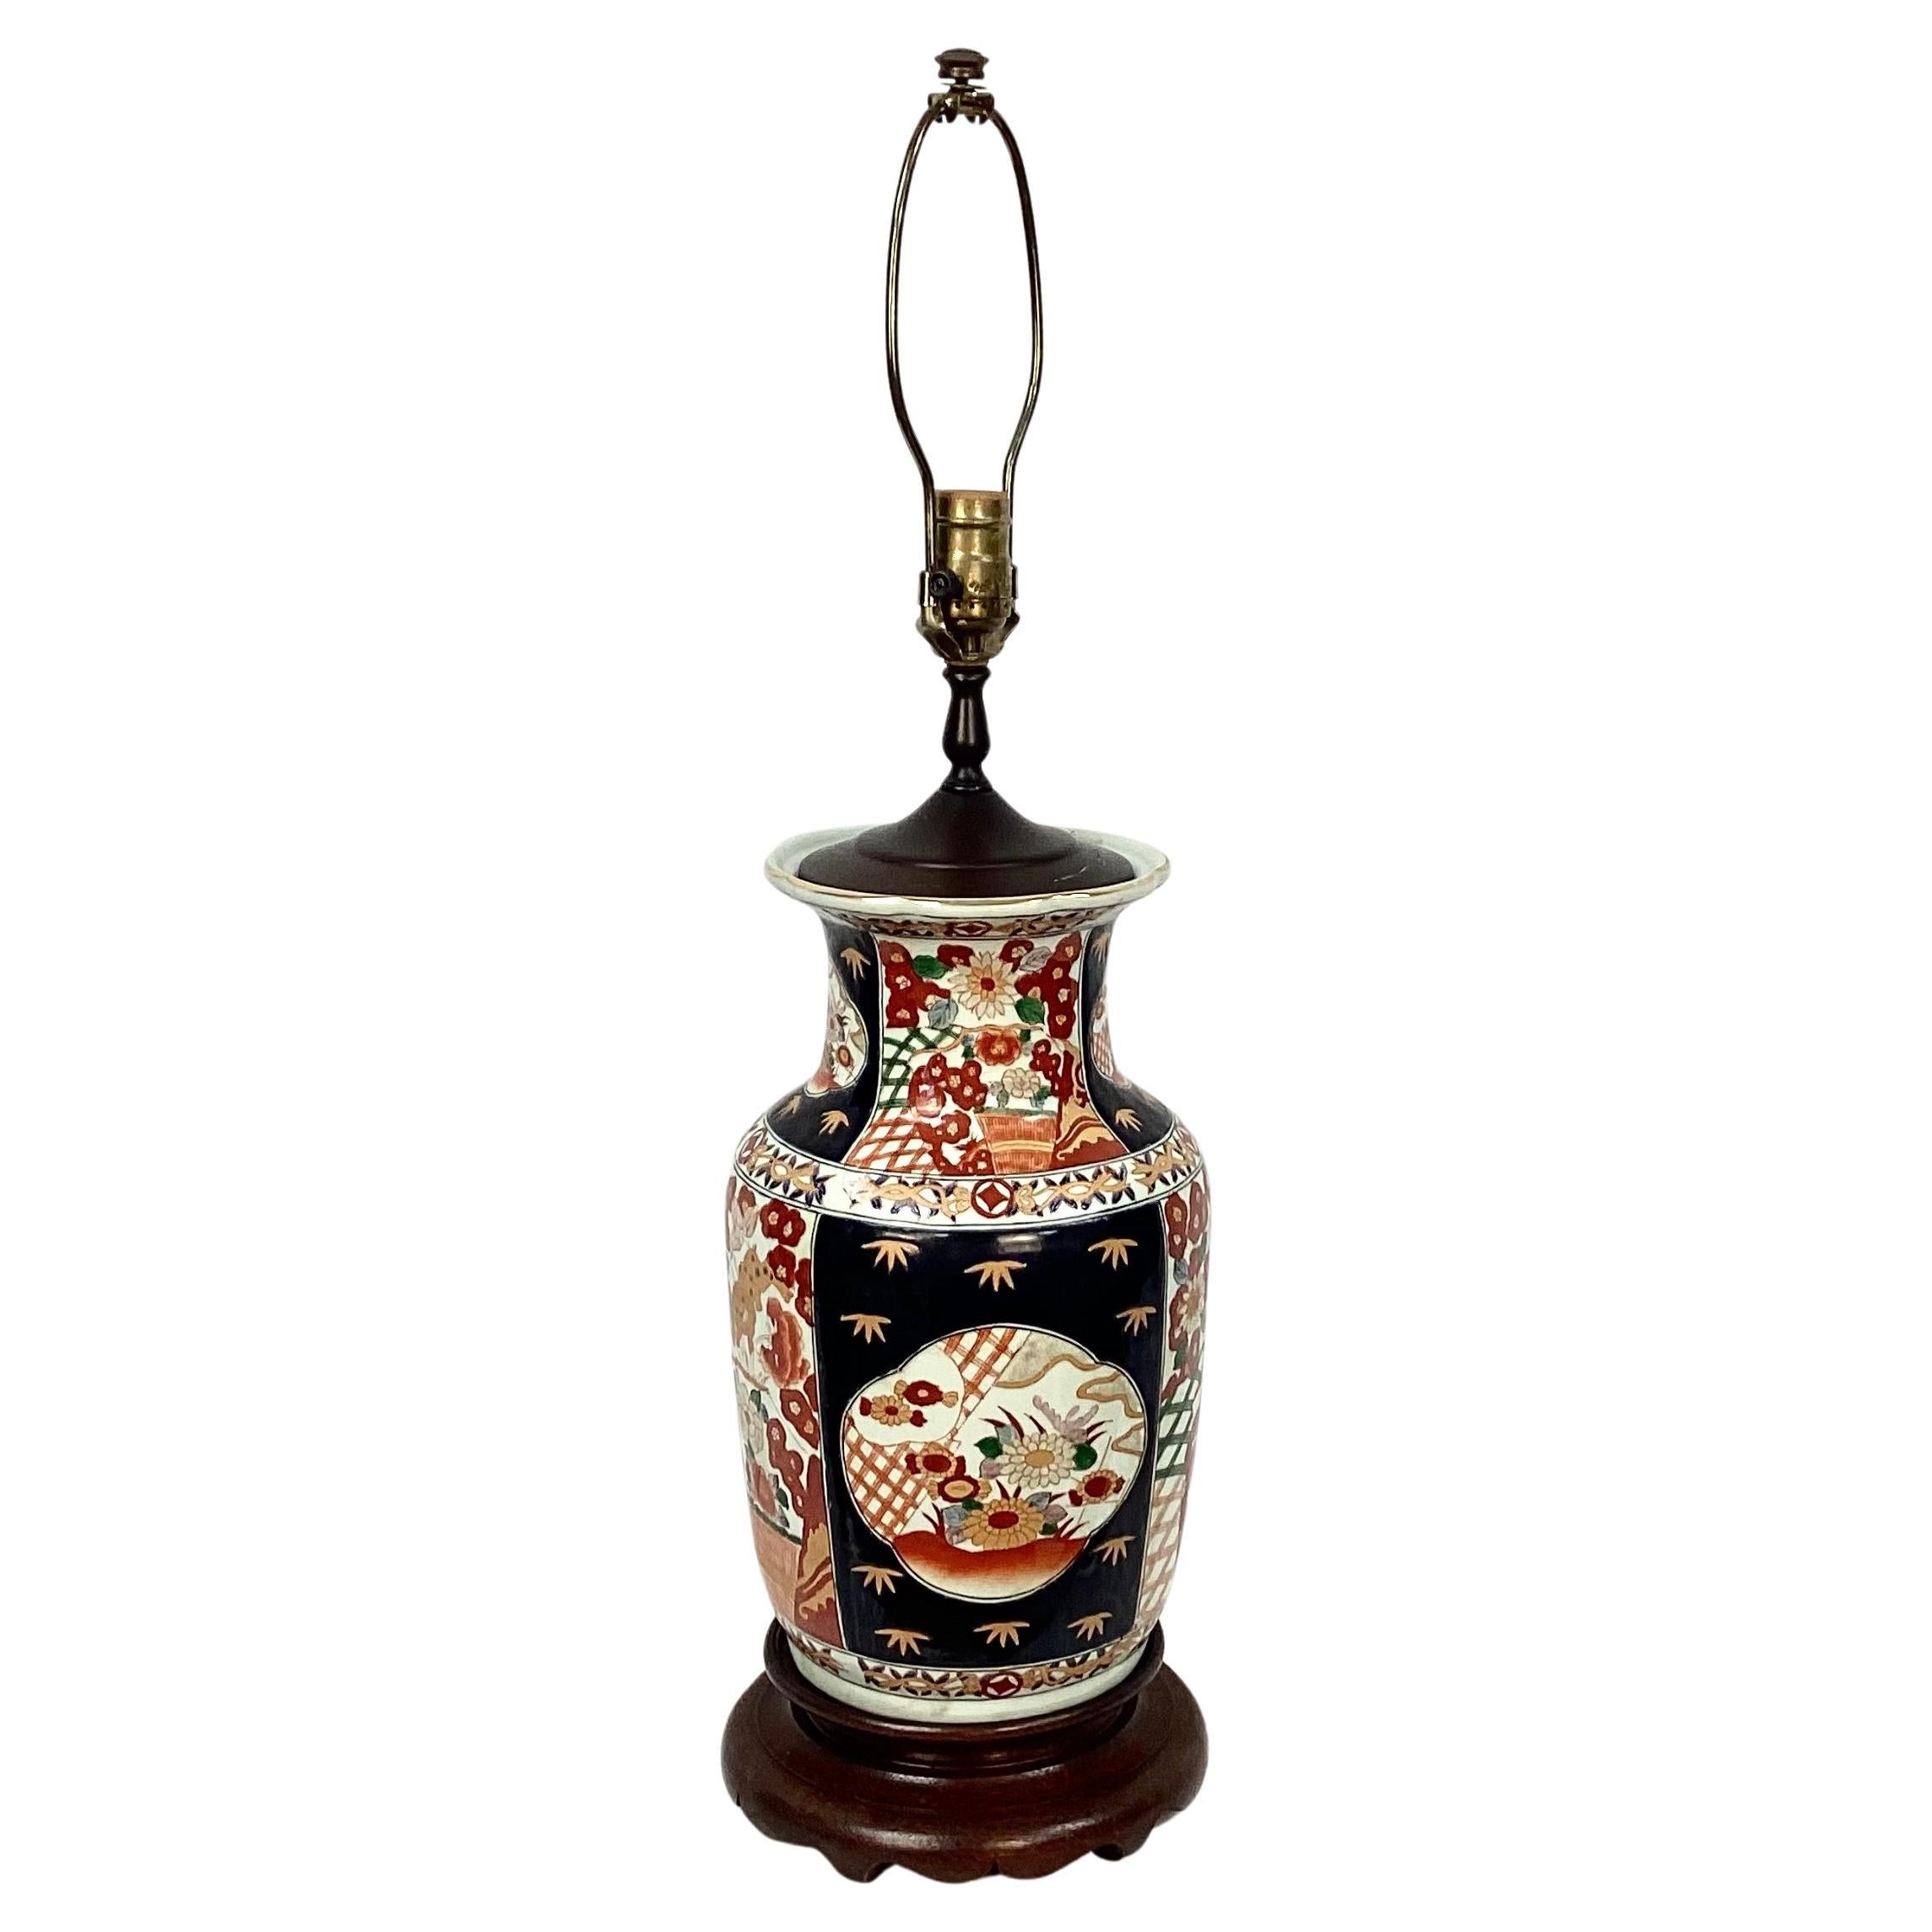 Early 20th century Japanese Imari vase porcelain lamp. Features beautiful cobalt blue with red, orange and white hand painted floral design, and gold trim. Lamp sits on a sturdy dark brown wooden vase. Harp and finial included. The height of 29